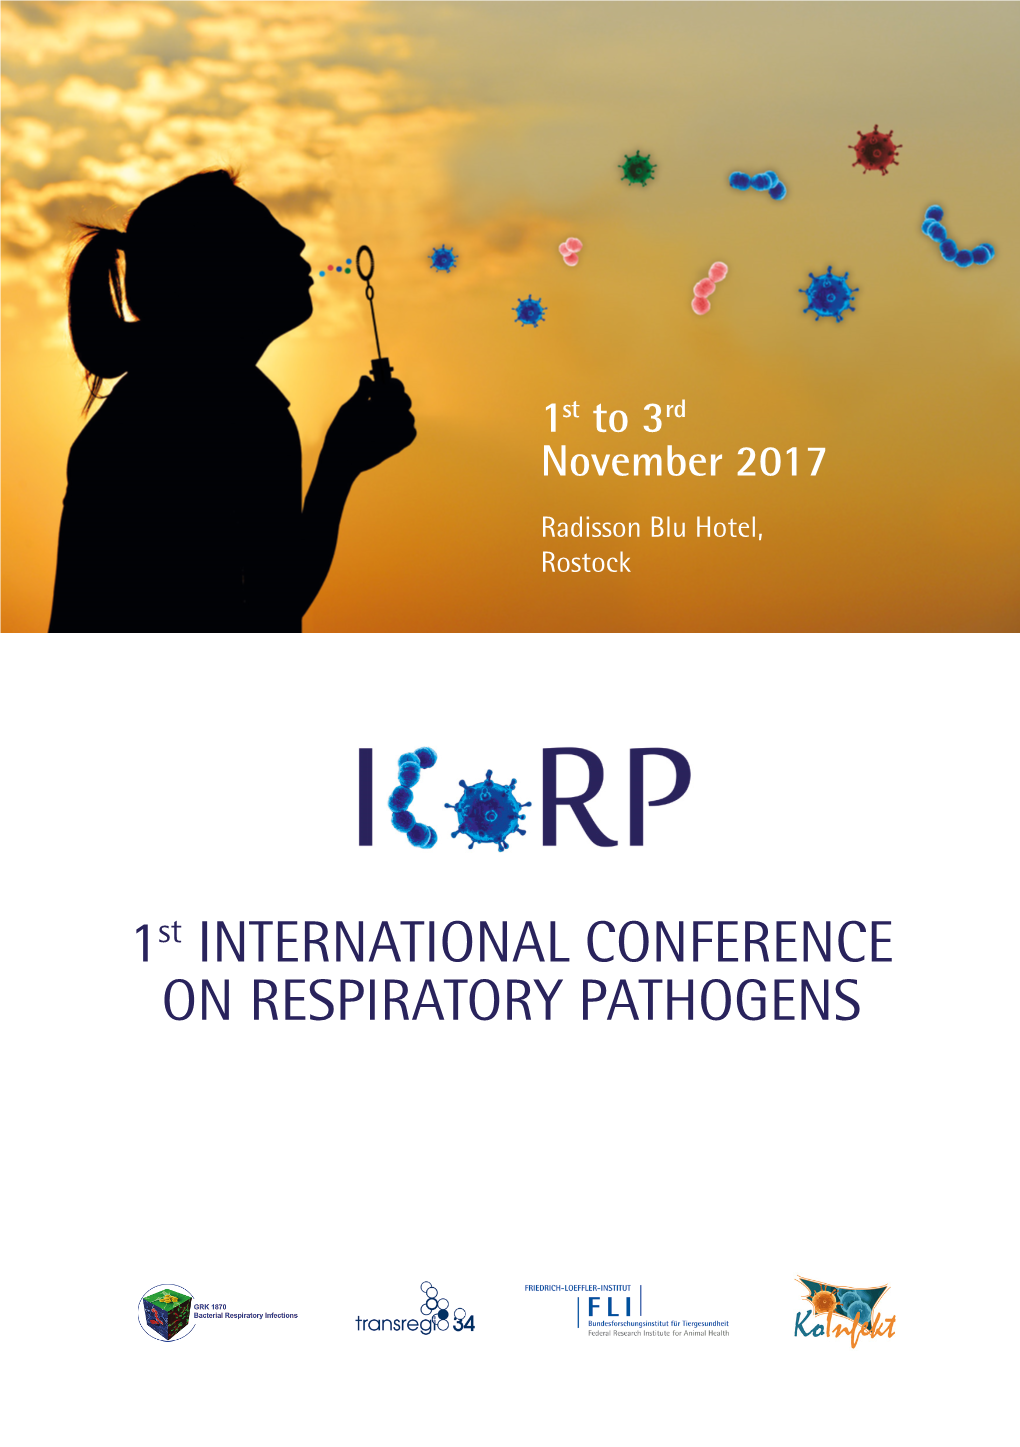 1St INTERNATIONAL CONFERENCE on RESPIRATORY PATHOGENS Welcome Note